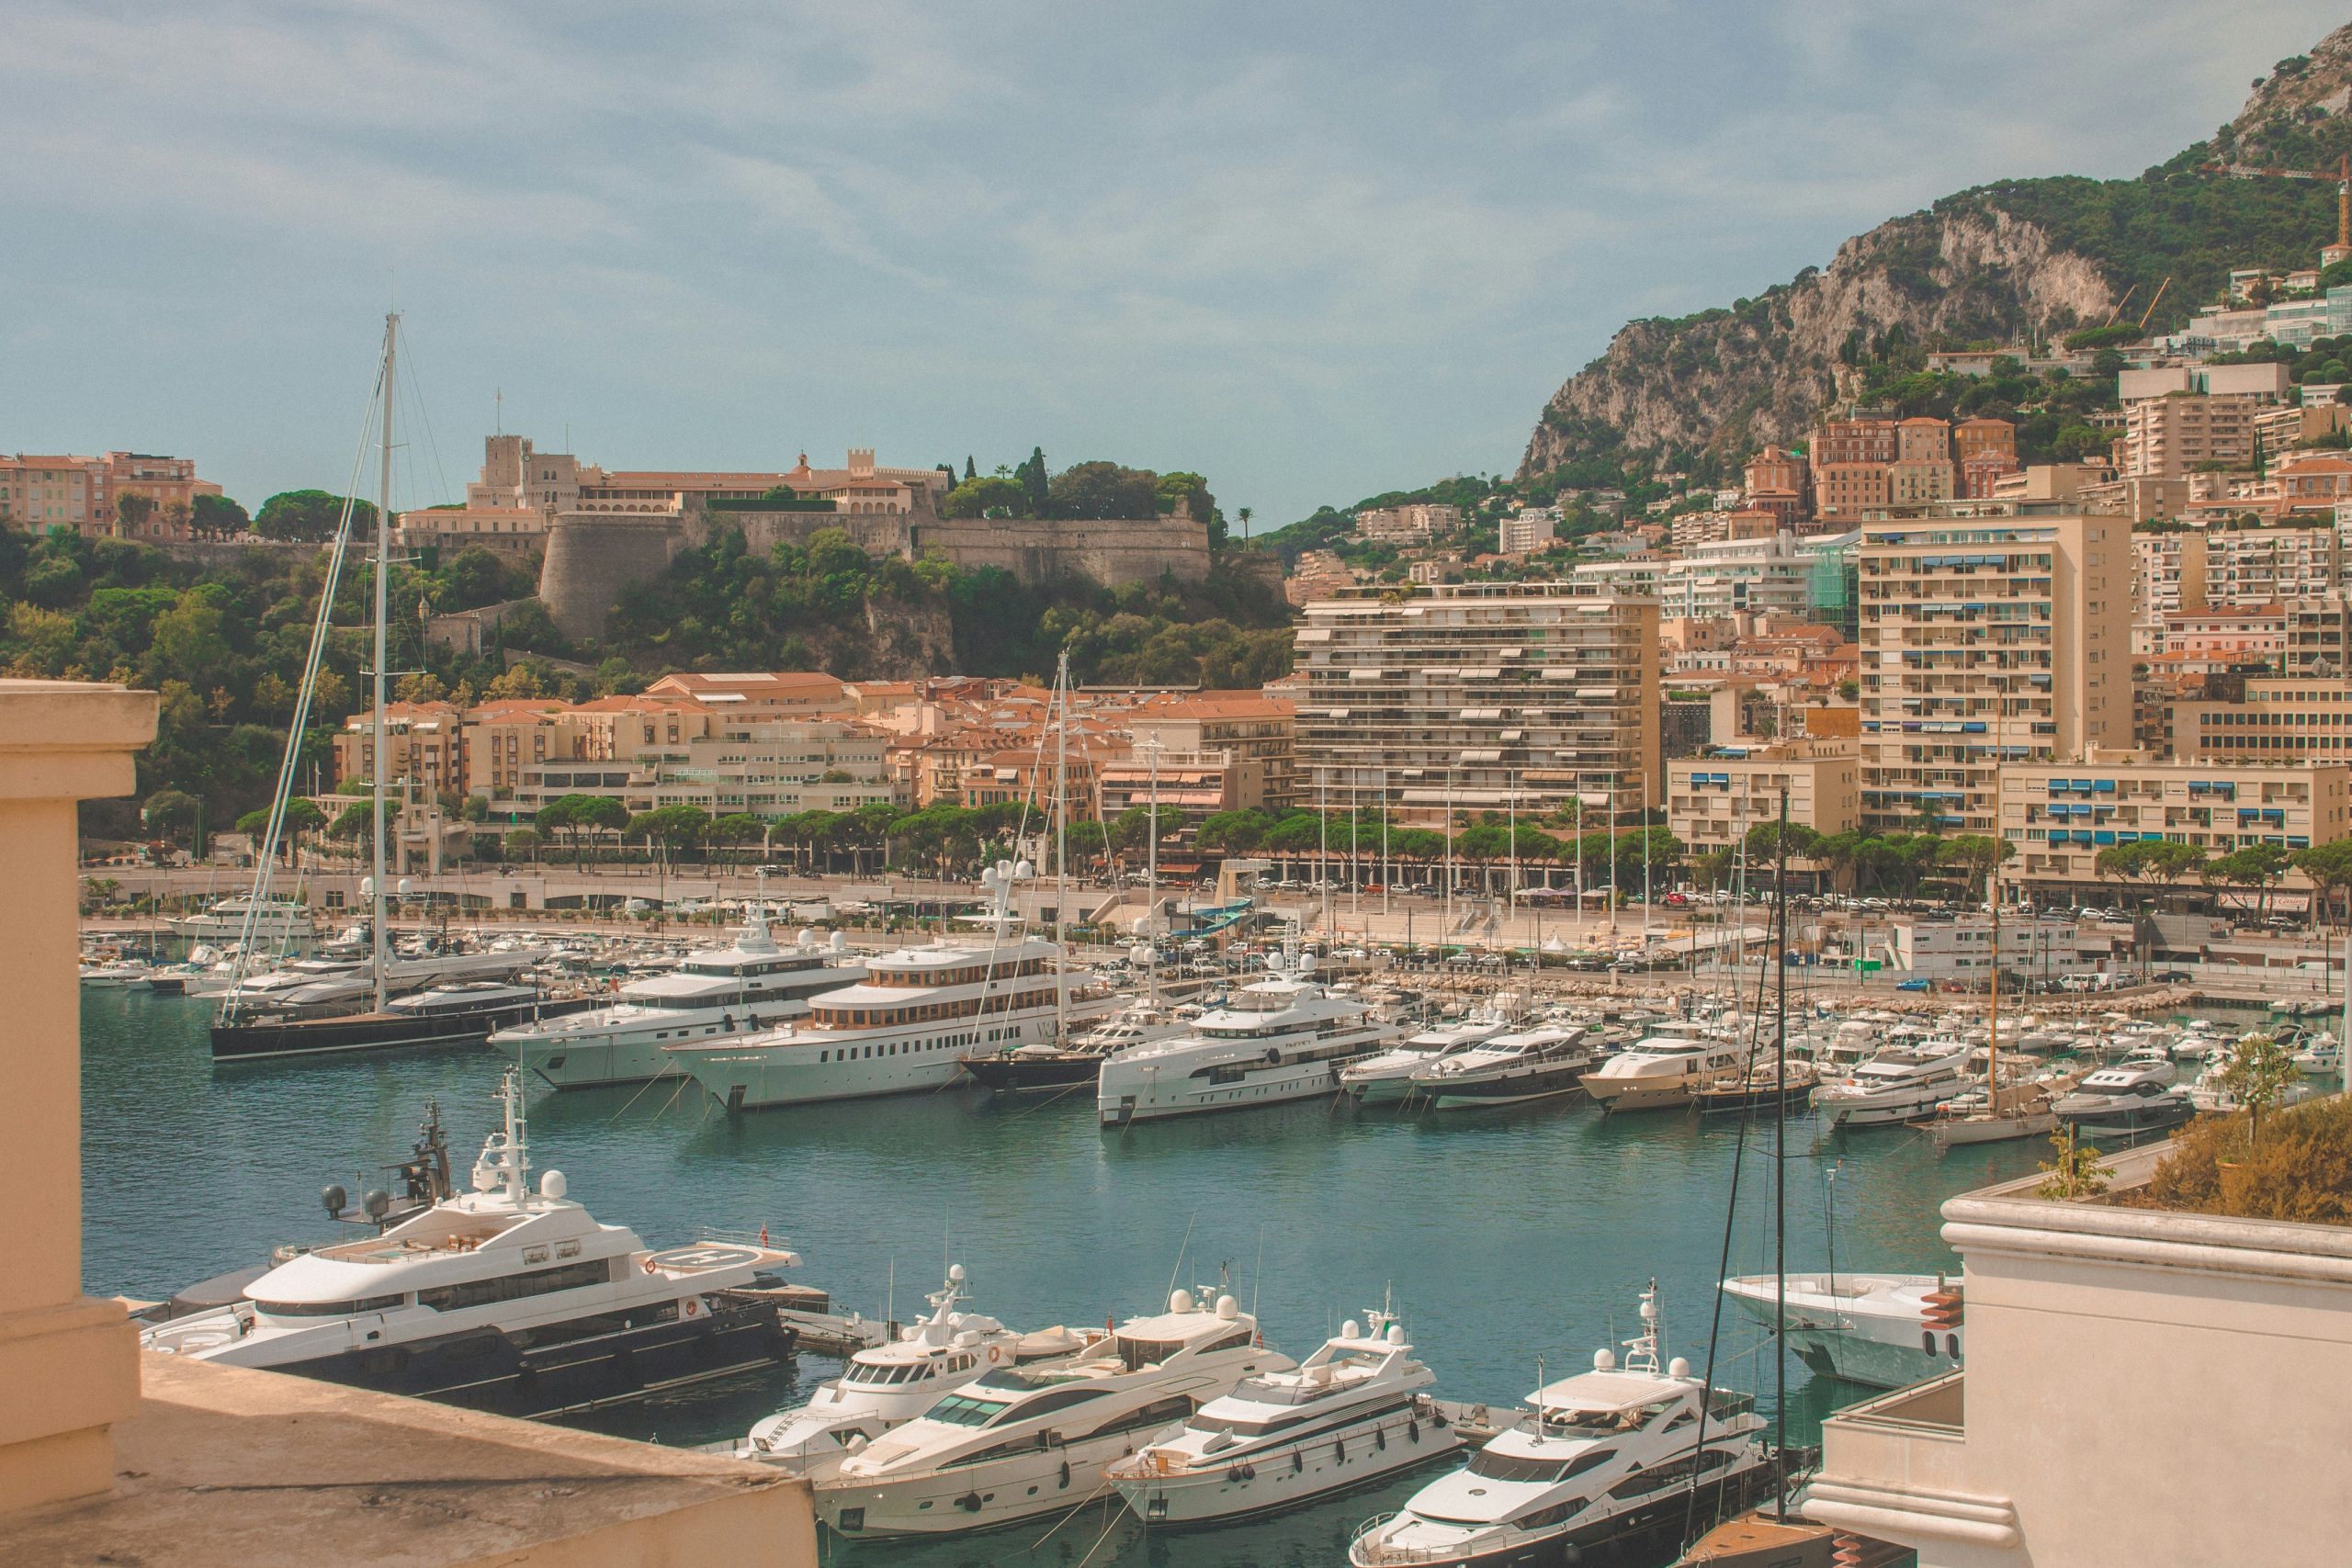 discover the allure of monaco as your next travel destination, from luxury casinos to stunning coastline views. plan your visit now!